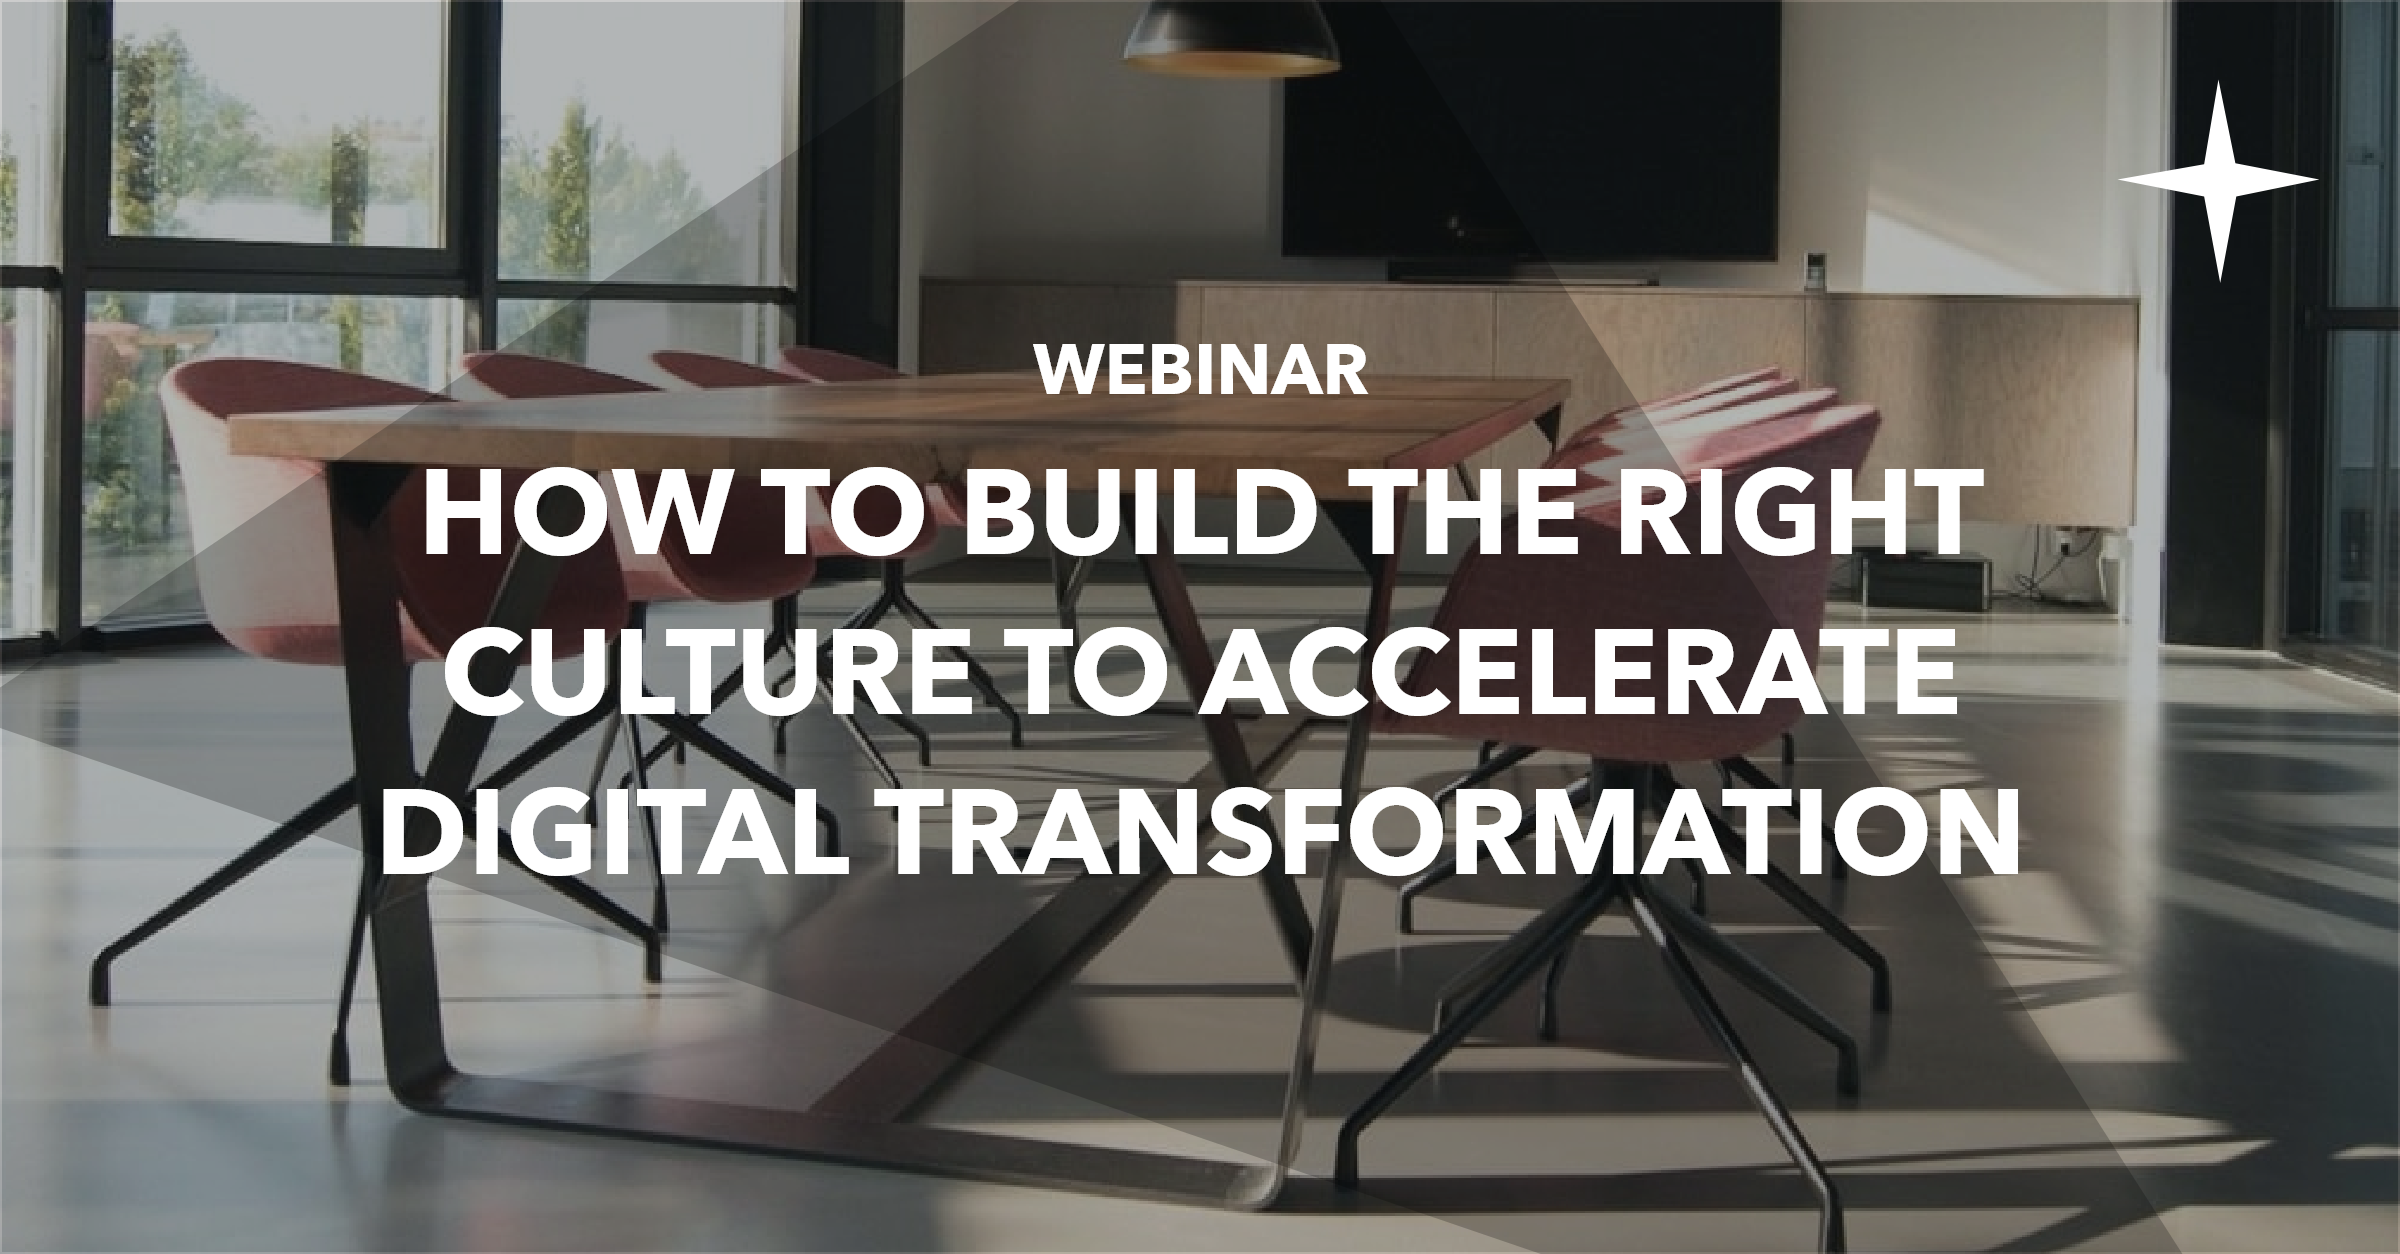 On demand webinar: How to build the right company culture to accelerate digital transformation